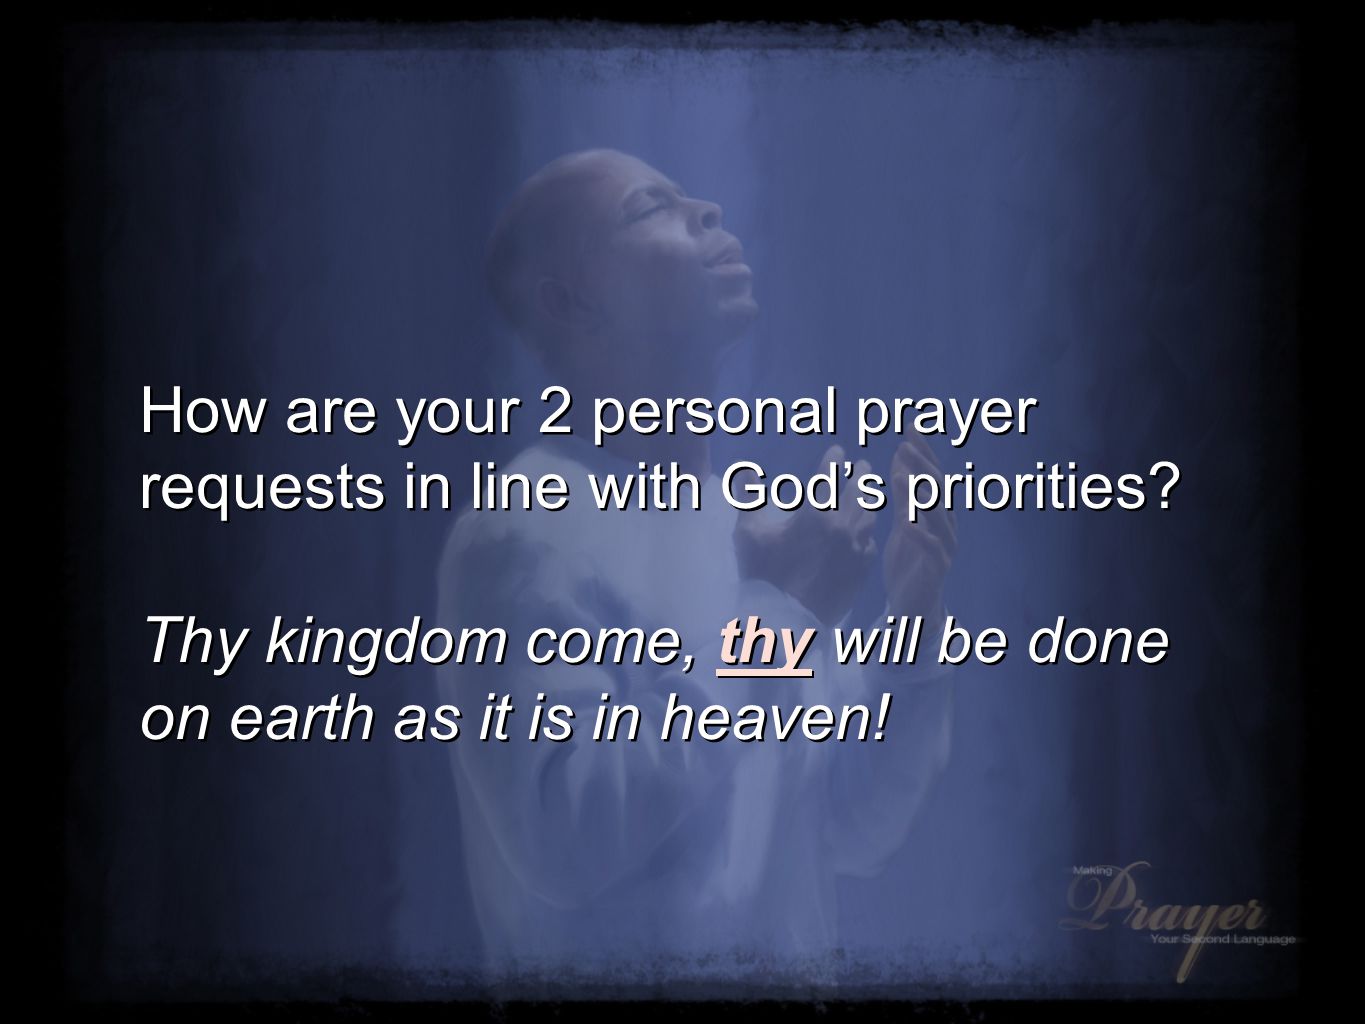 How are your 2 personal prayer requests in line with God’s priorities.